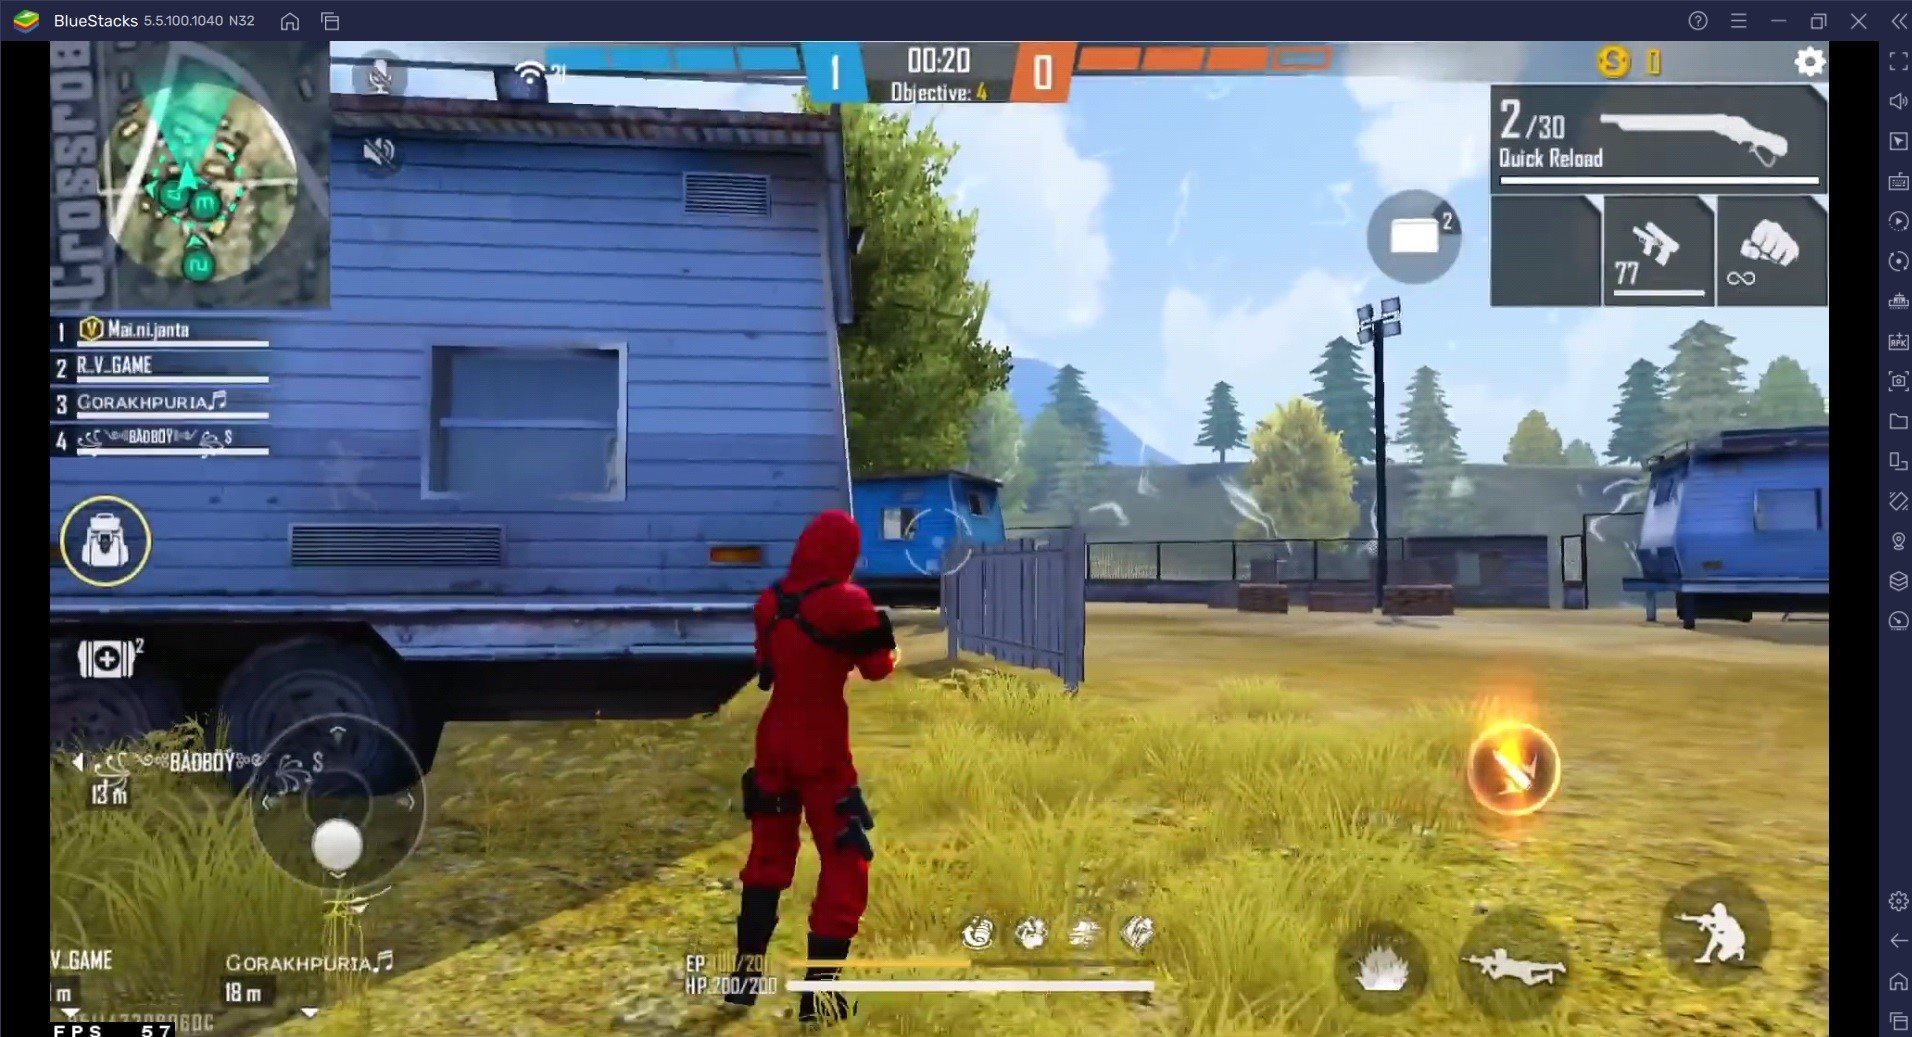 Free Fire Gun Guide for Close Range Fights - SMG and Shotguns Only